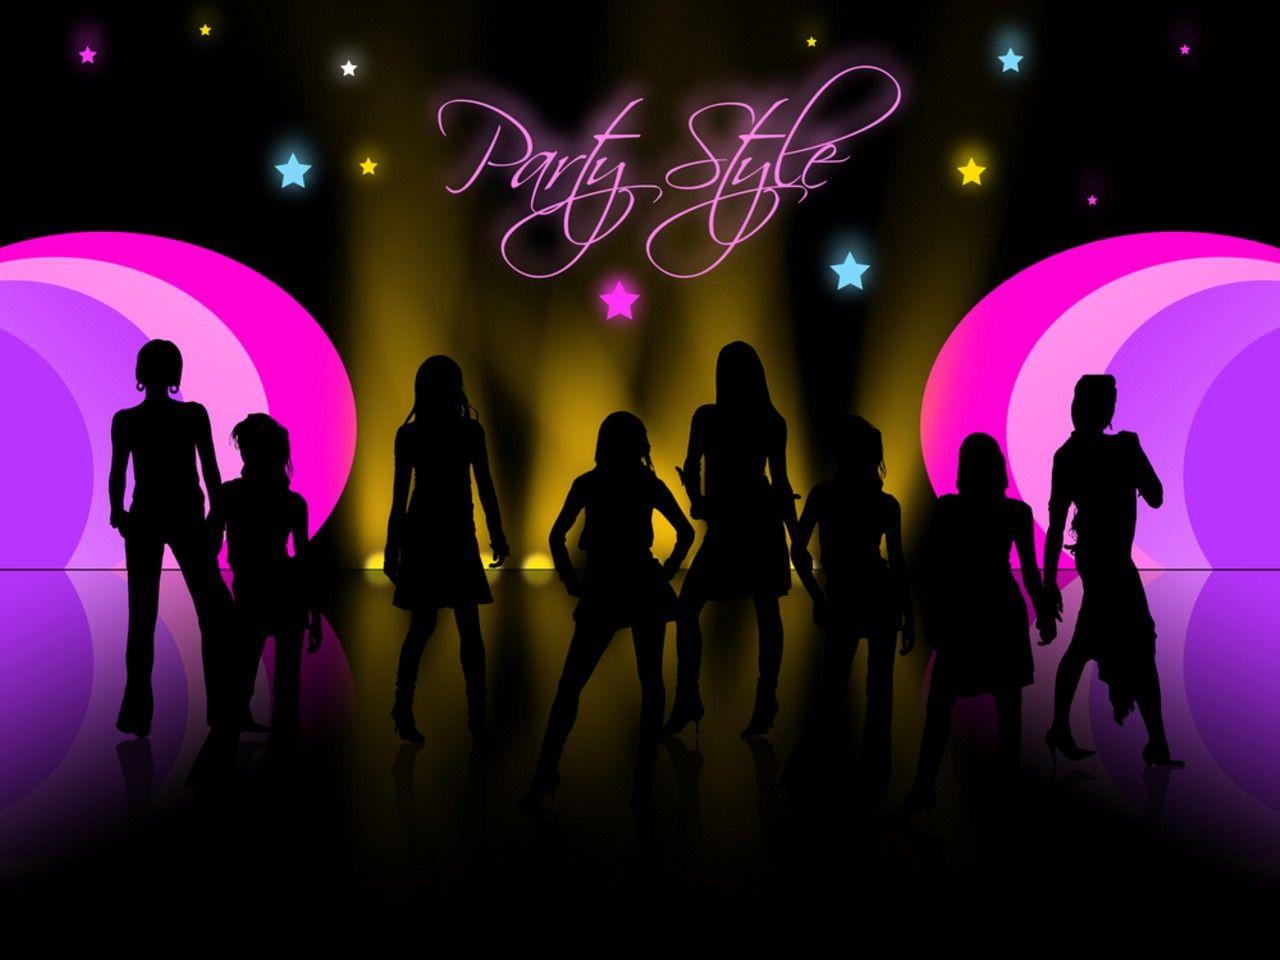 People silhouettes in night club PPT Background